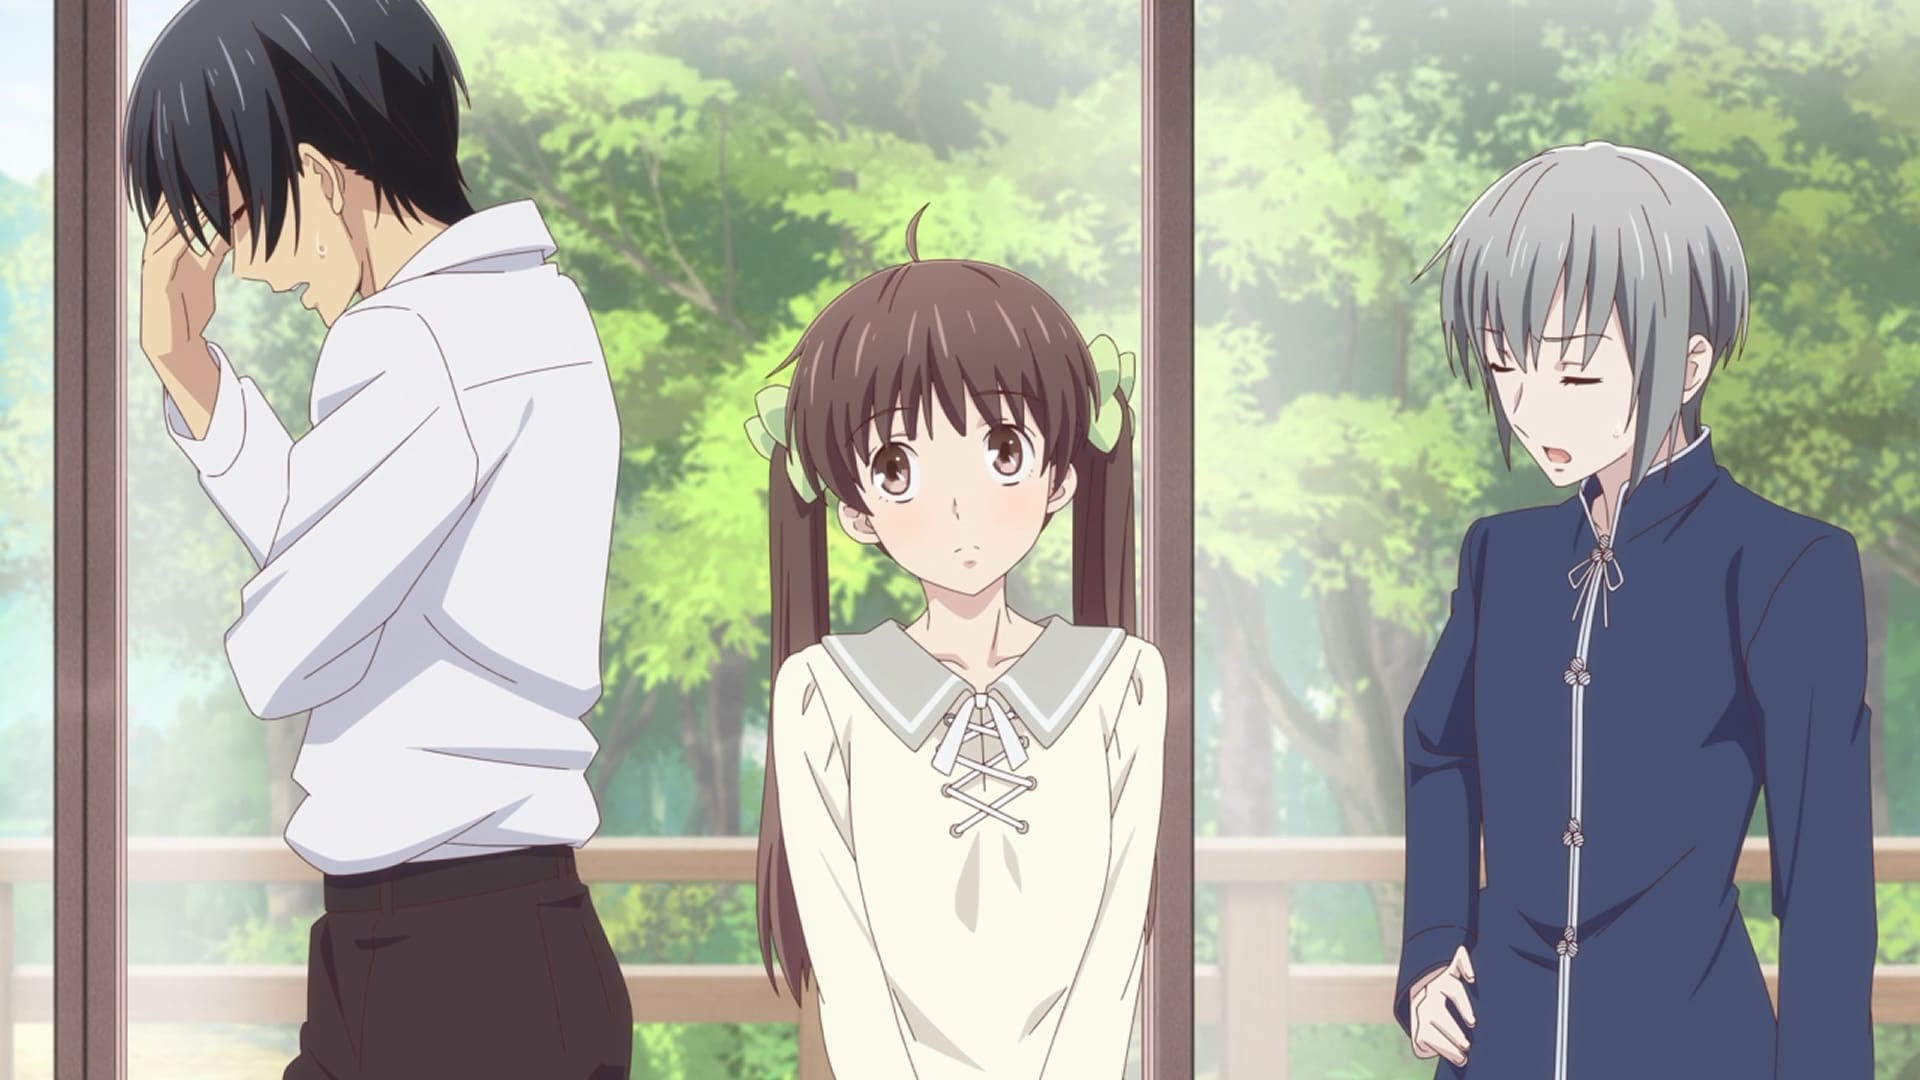 Fruits Basket 2019 Episode 16: Shigure and co. Continue Their Vacation